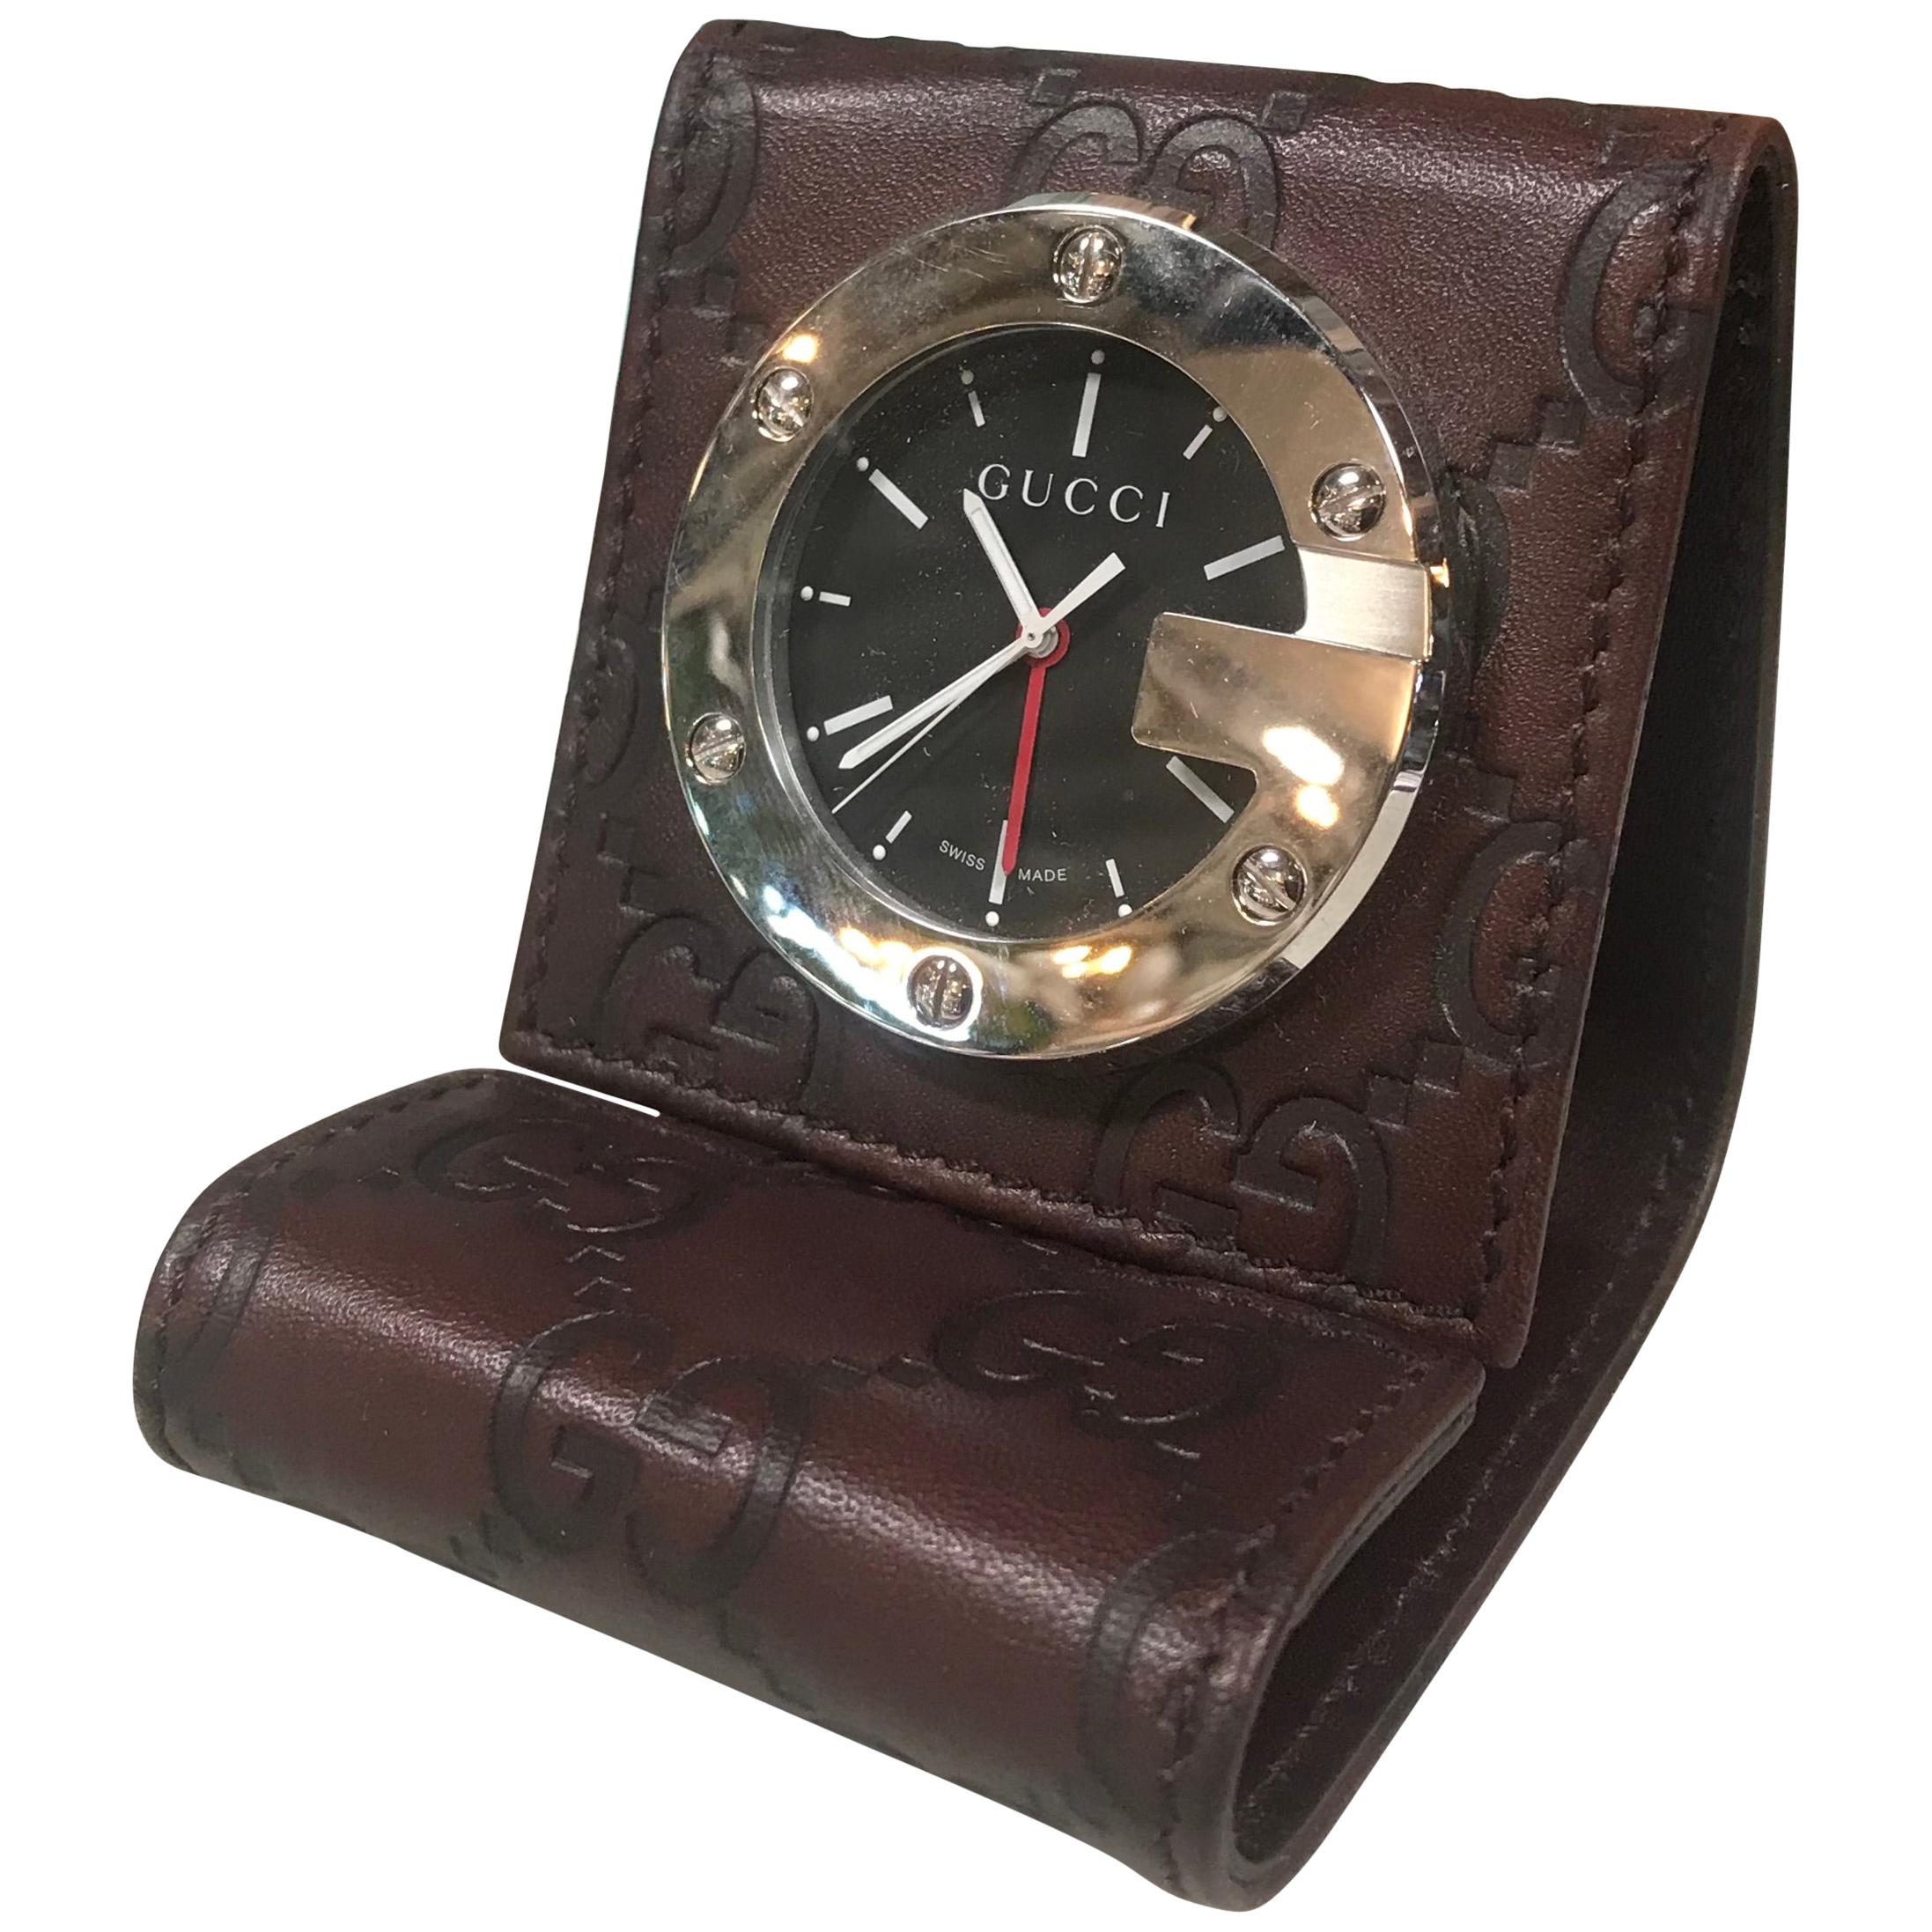 Gucci Limited Edition Brown Travel Desk Alarm Clock/Watch, Italy, 1980s